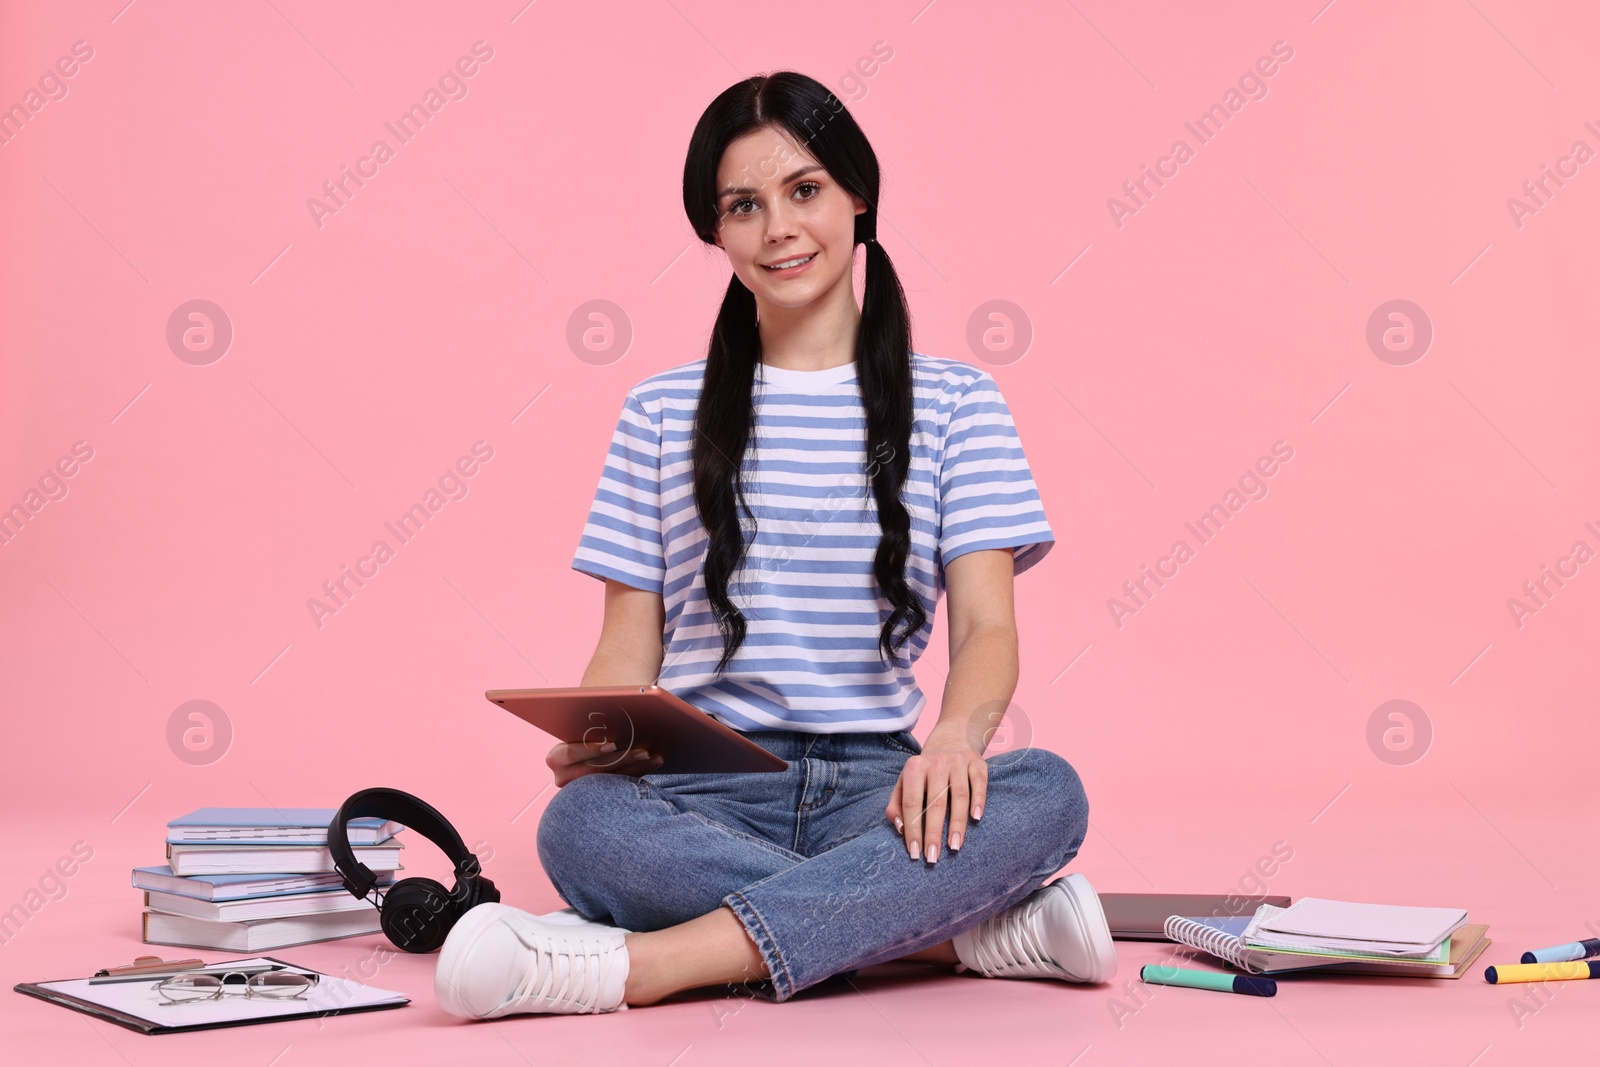 Photo of Smiling student with tablet sitting among books and stationery on pink background